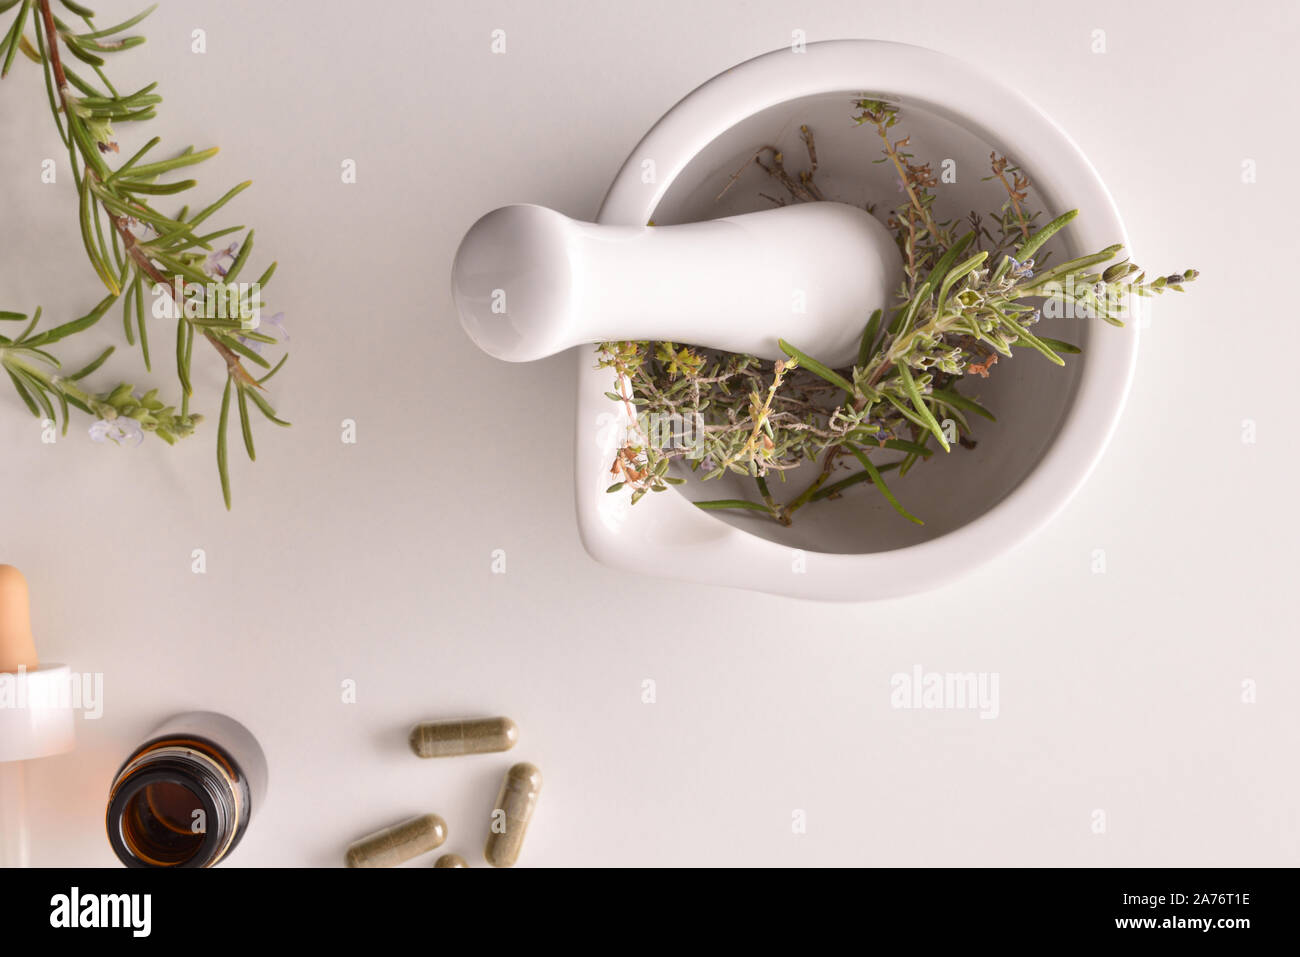 Mortar with herbs for processing natural capsules on white table. Alternative natural medicine concept. Top view. Horizontal composition. Stock Photo